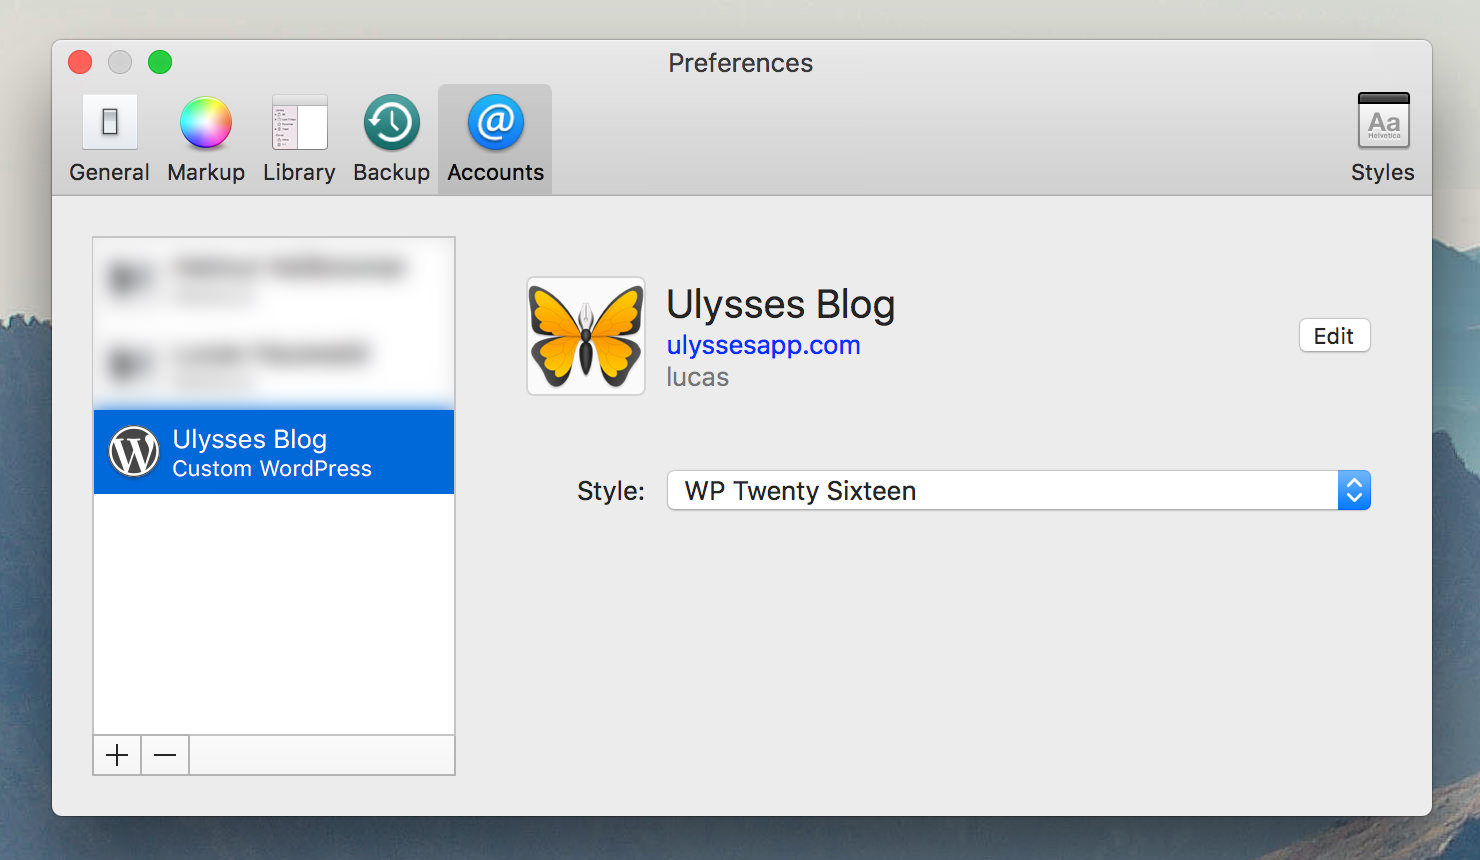 Screenshot of Ulysses’ account preferences. The WordPress account contains a pop-up menu called “Style” that defines the preview style for this account.